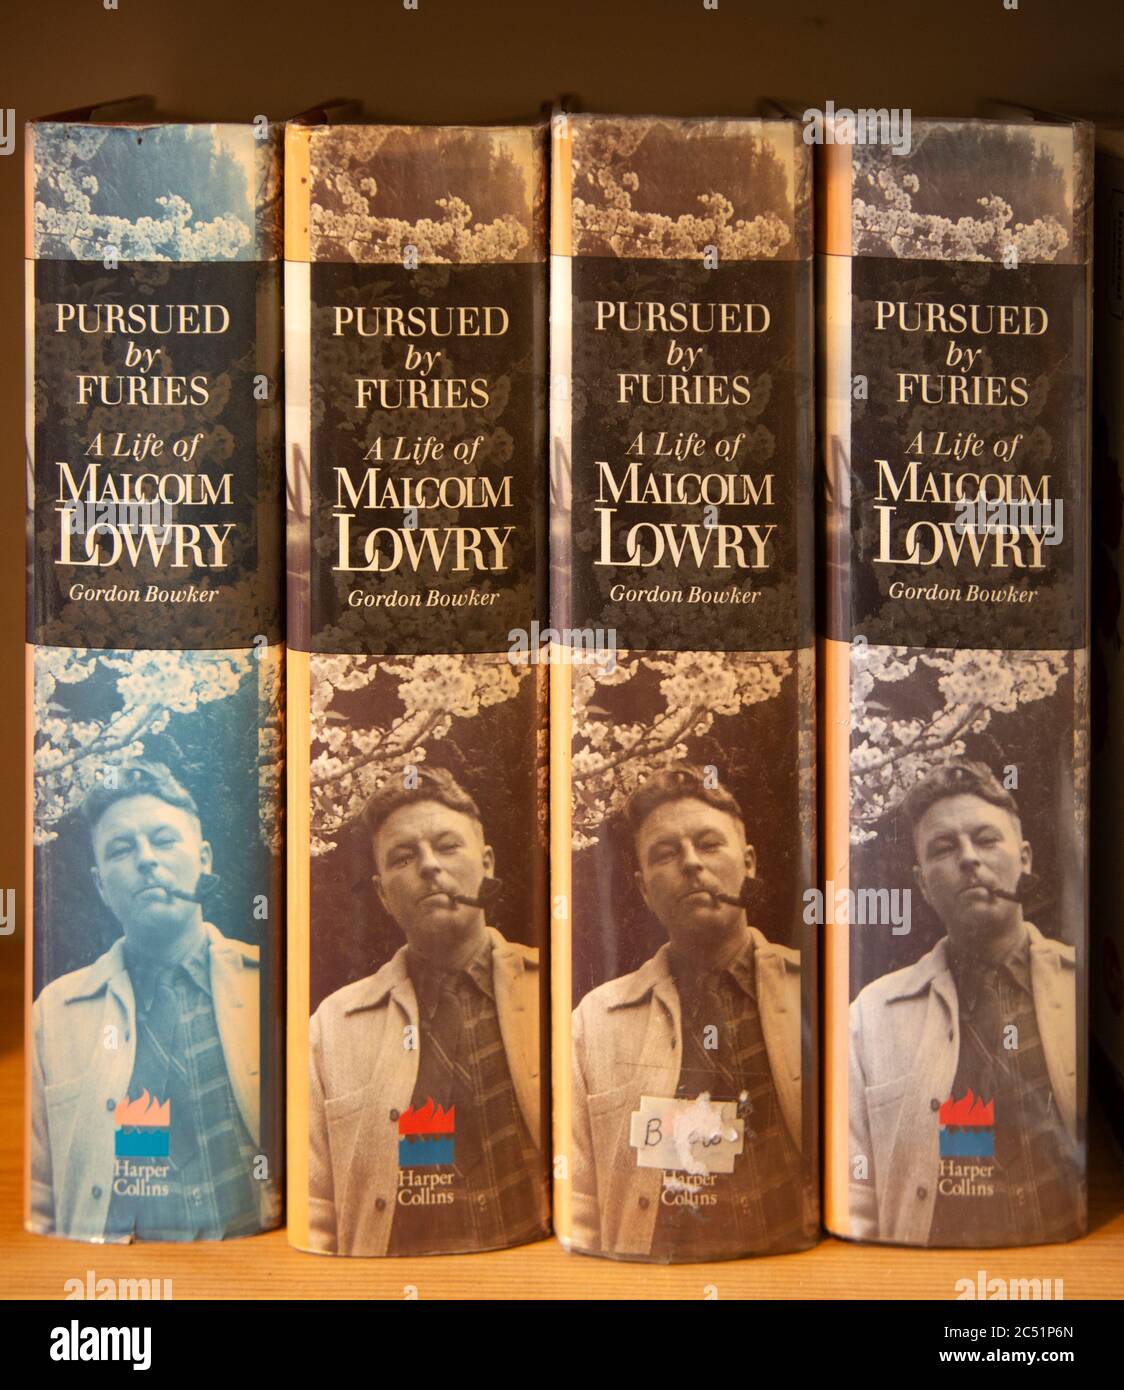 Pursued by Furies, a Life of Malcolm Lowry by Gordon Bowker, four hardback books in a row Stock Photo